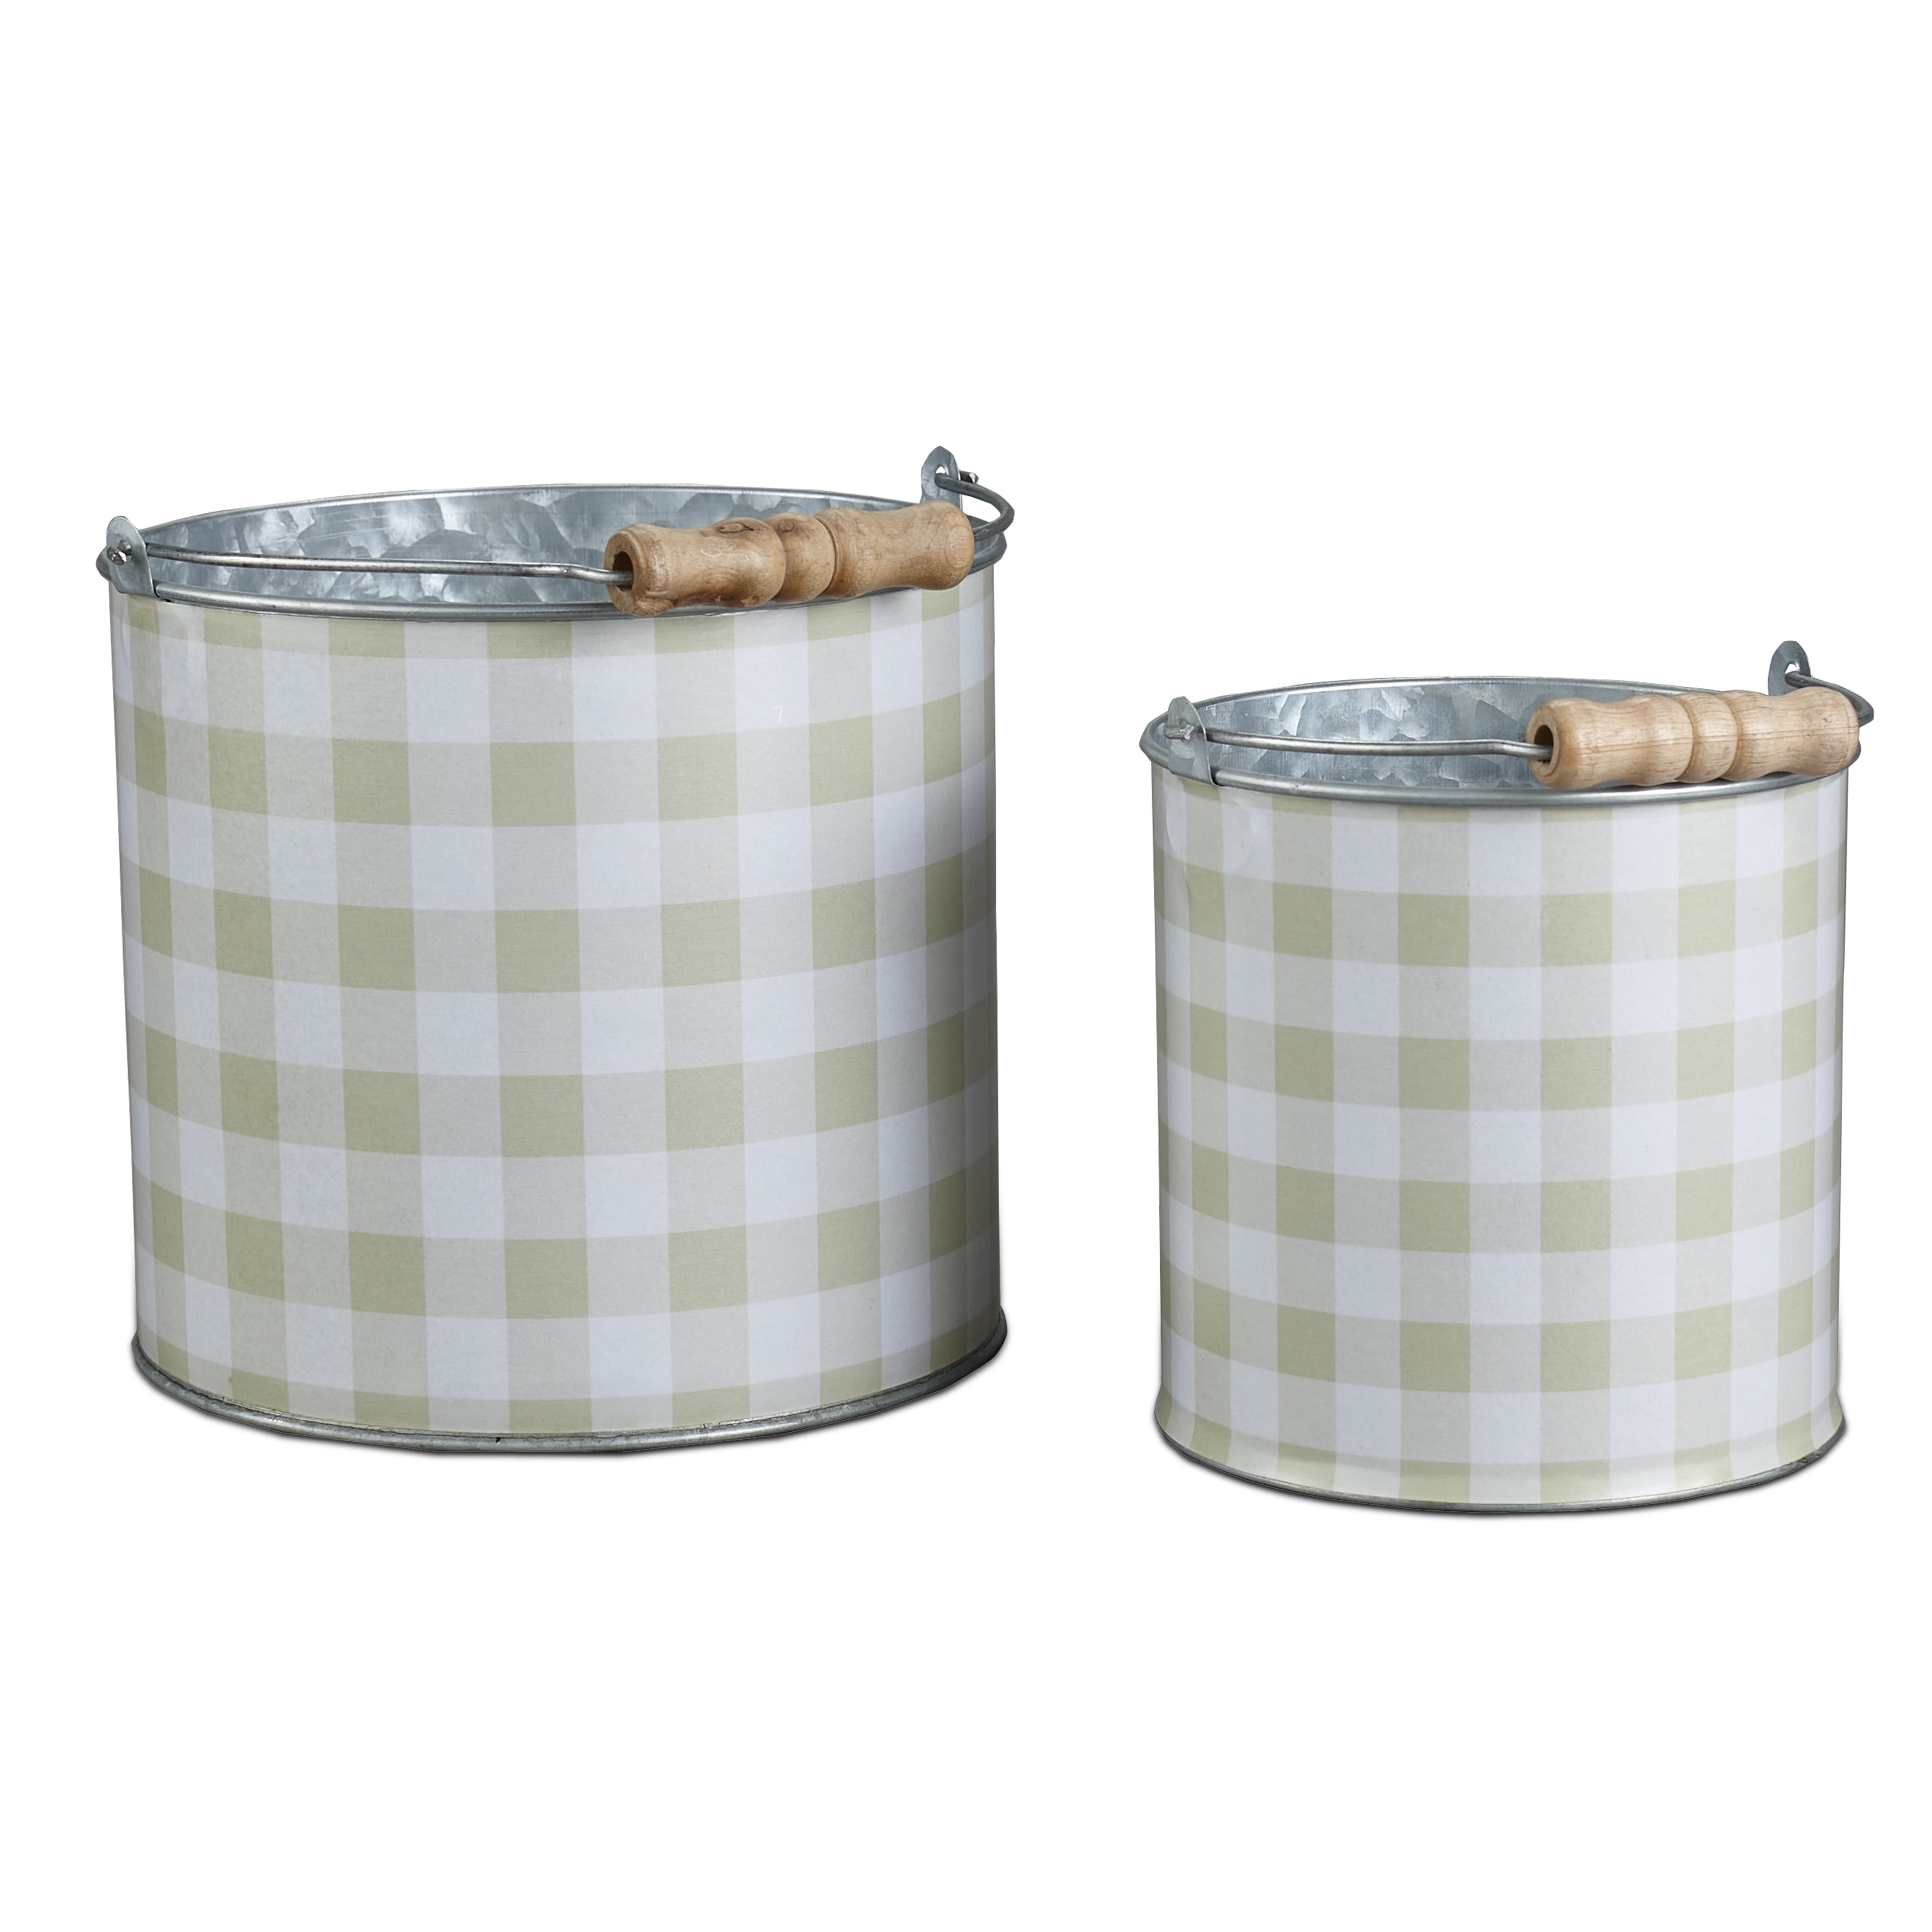 Metal Checkered Planter Buckets with Carrying Handles - of 2 - Beige